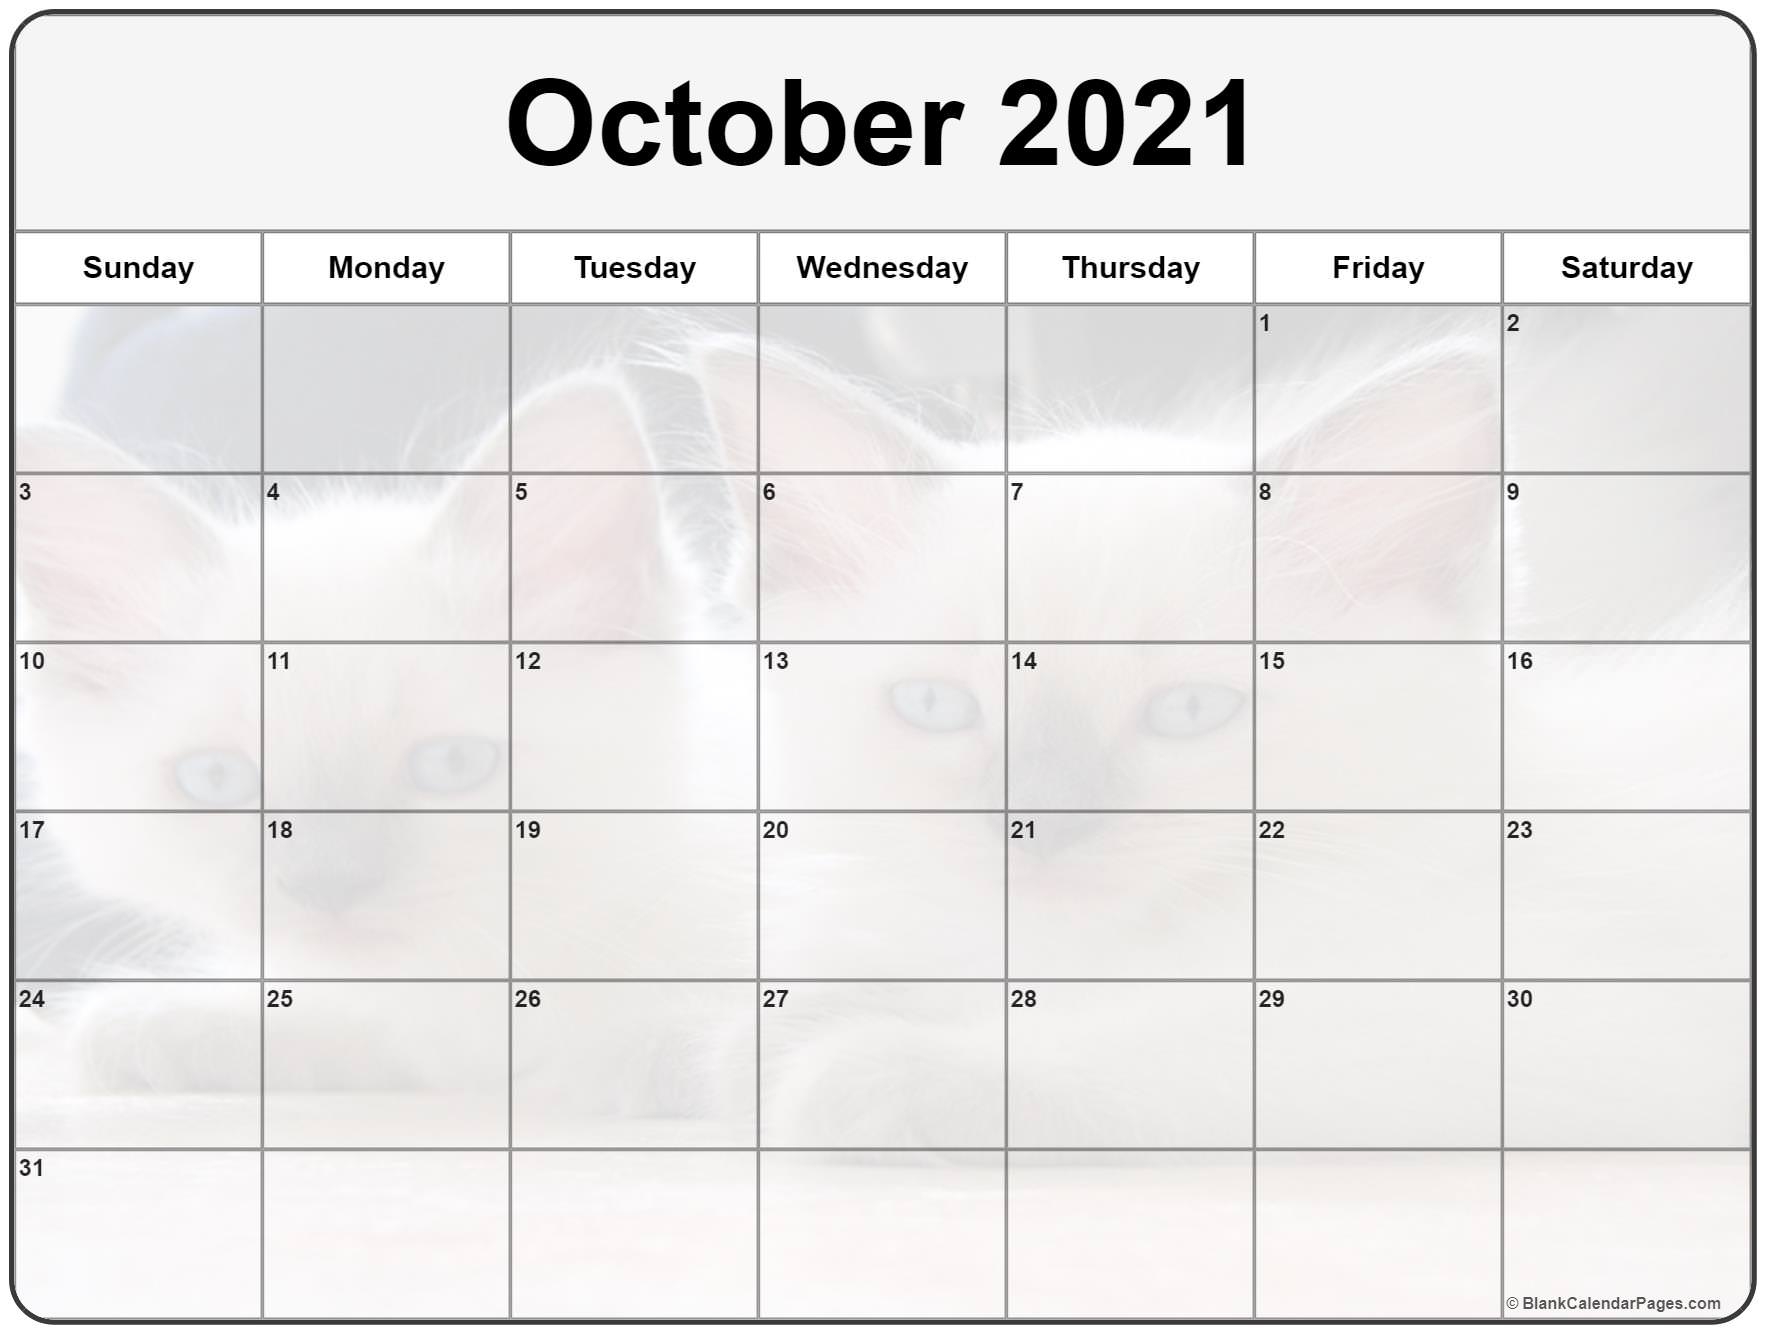 Collection Of October 2021 Photo Calendars With Image Filters. Blank October 2021 Calendar